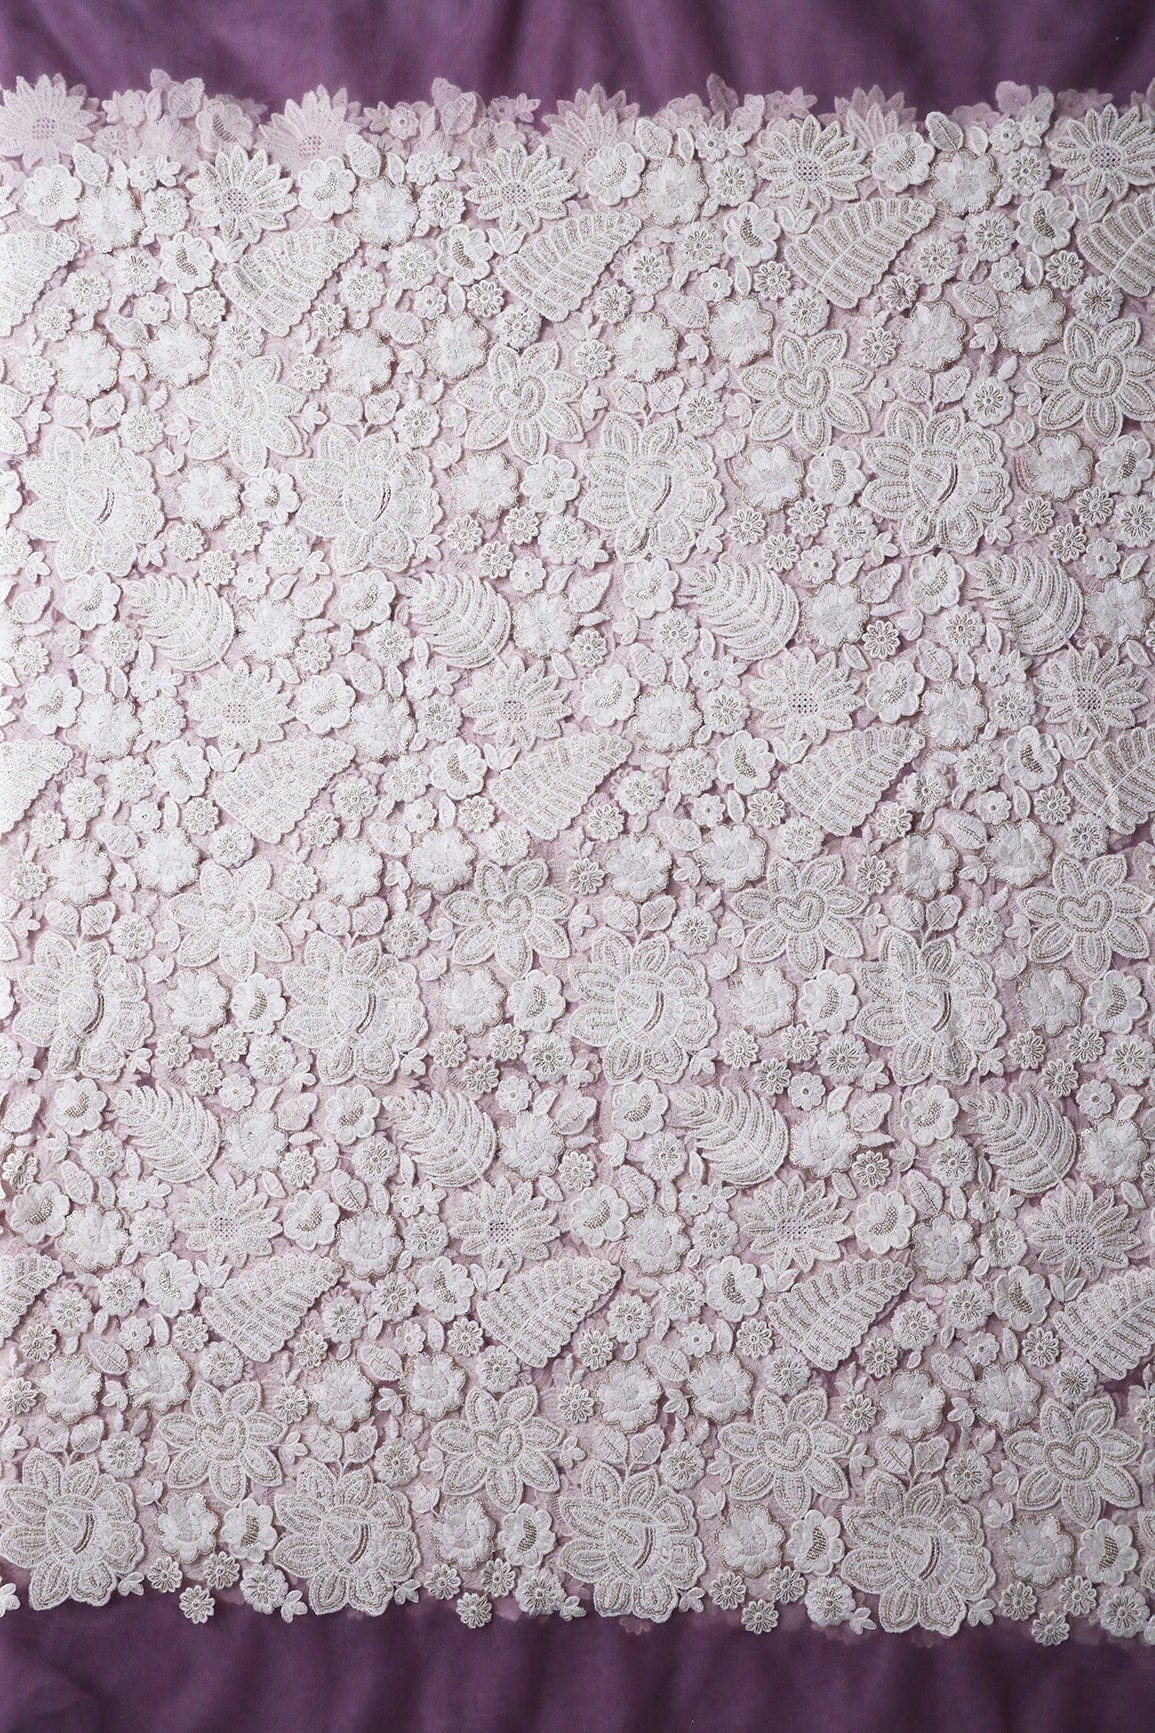 White Thread With Sequins Heavy Floral Embroidery On Lilac Purple Soft Net Fabric - doeraa